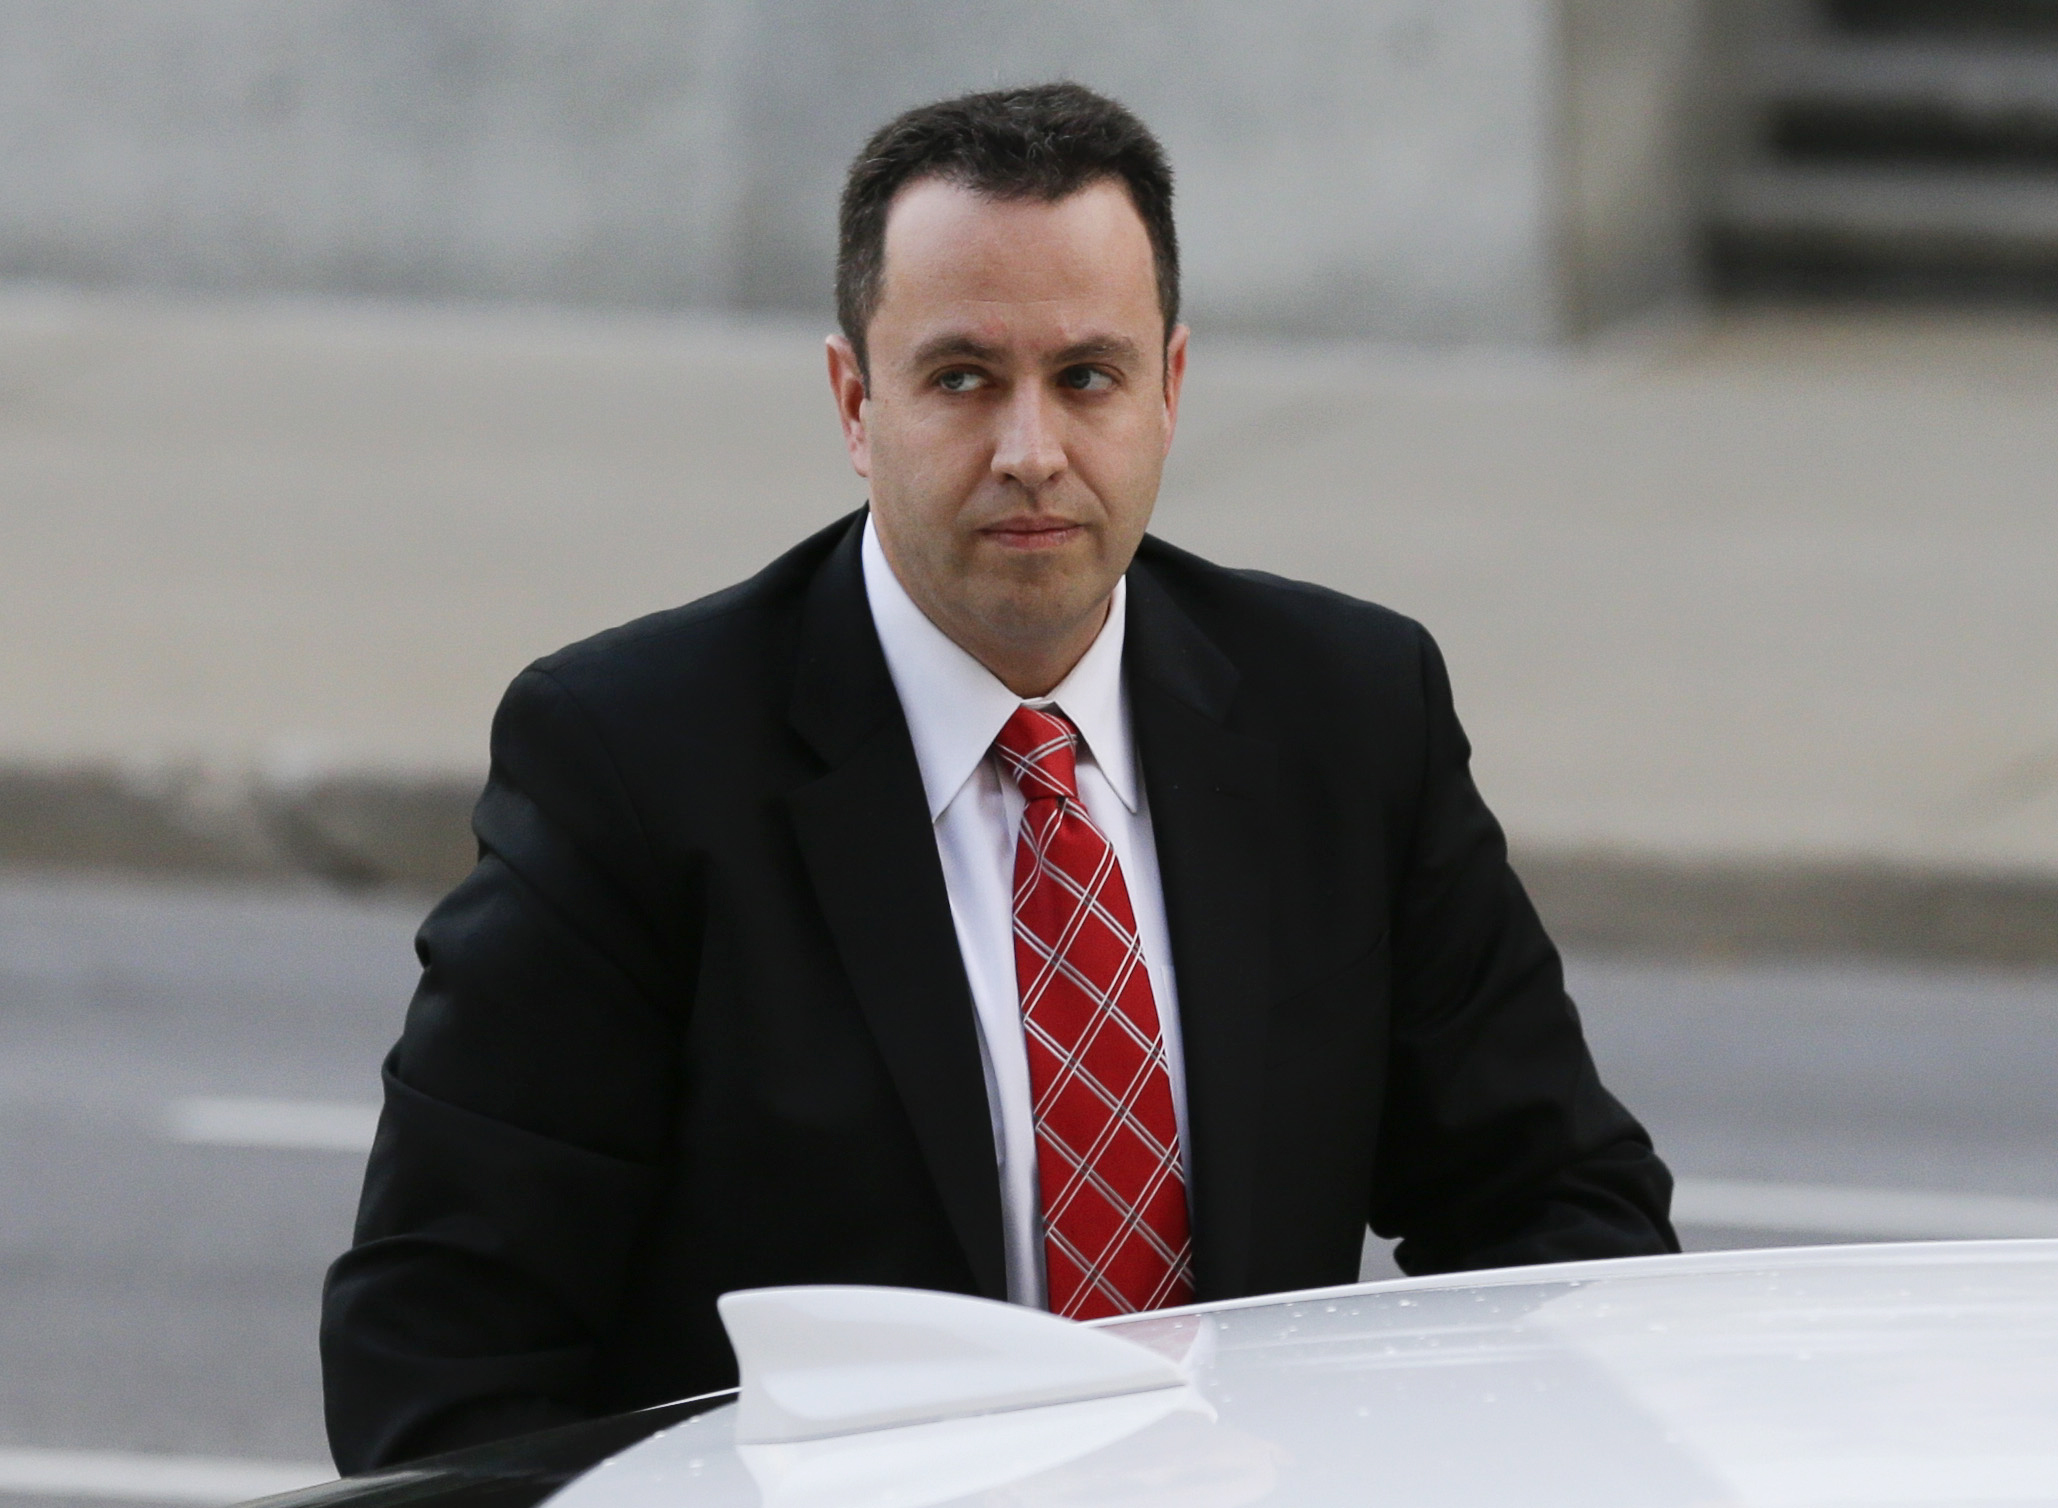 Former Subway pitchman Jared Fogle arrives at the federal courthouse in Indianapolis on Nov. 19, 2015. (Michael Conroy—AP)